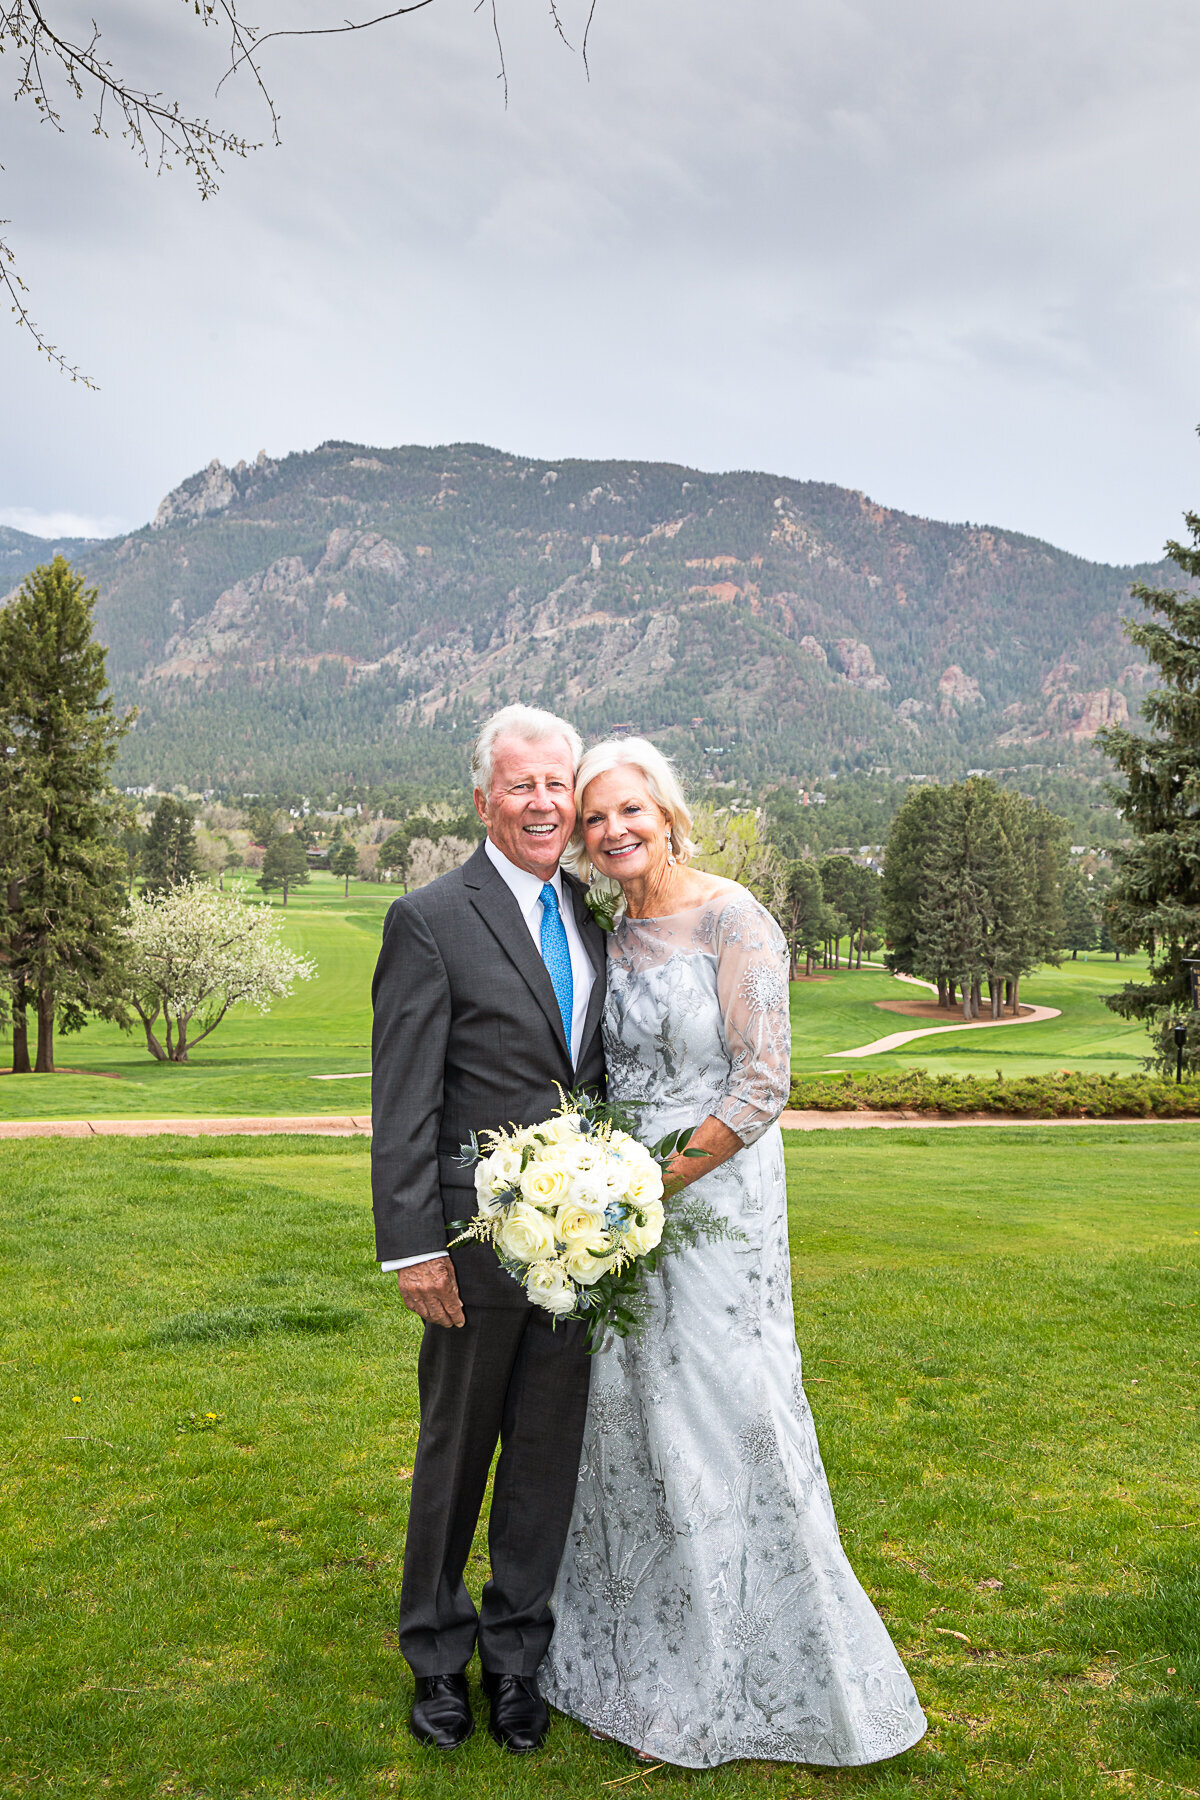 Bride and Groom with Cheyenne Mountain in the background